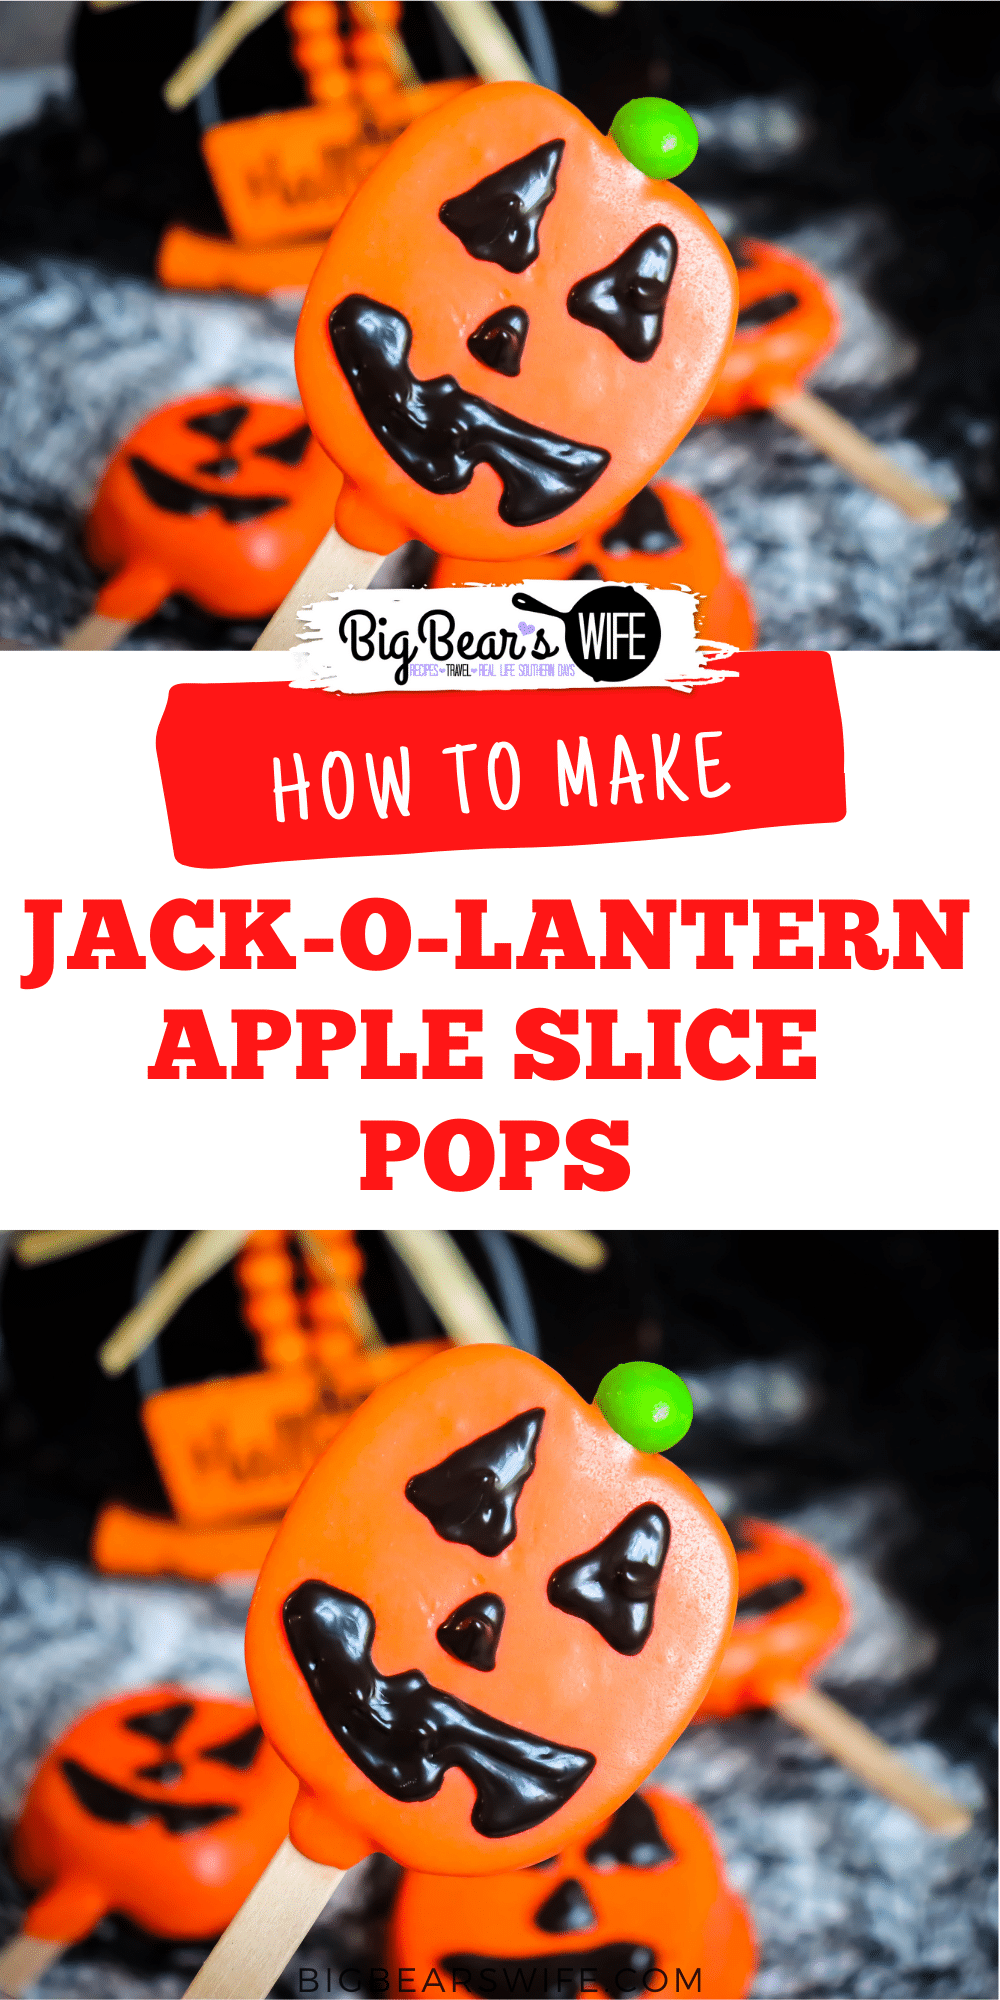  Jack-O-Lantern Apple Slice Pops - sliced apples dipped in melted orange candy coating and decorate to look like fun Jack-O-Lantern pumpkins! Fun and Easy Halloween Idea to make with kids! via @bigbearswife